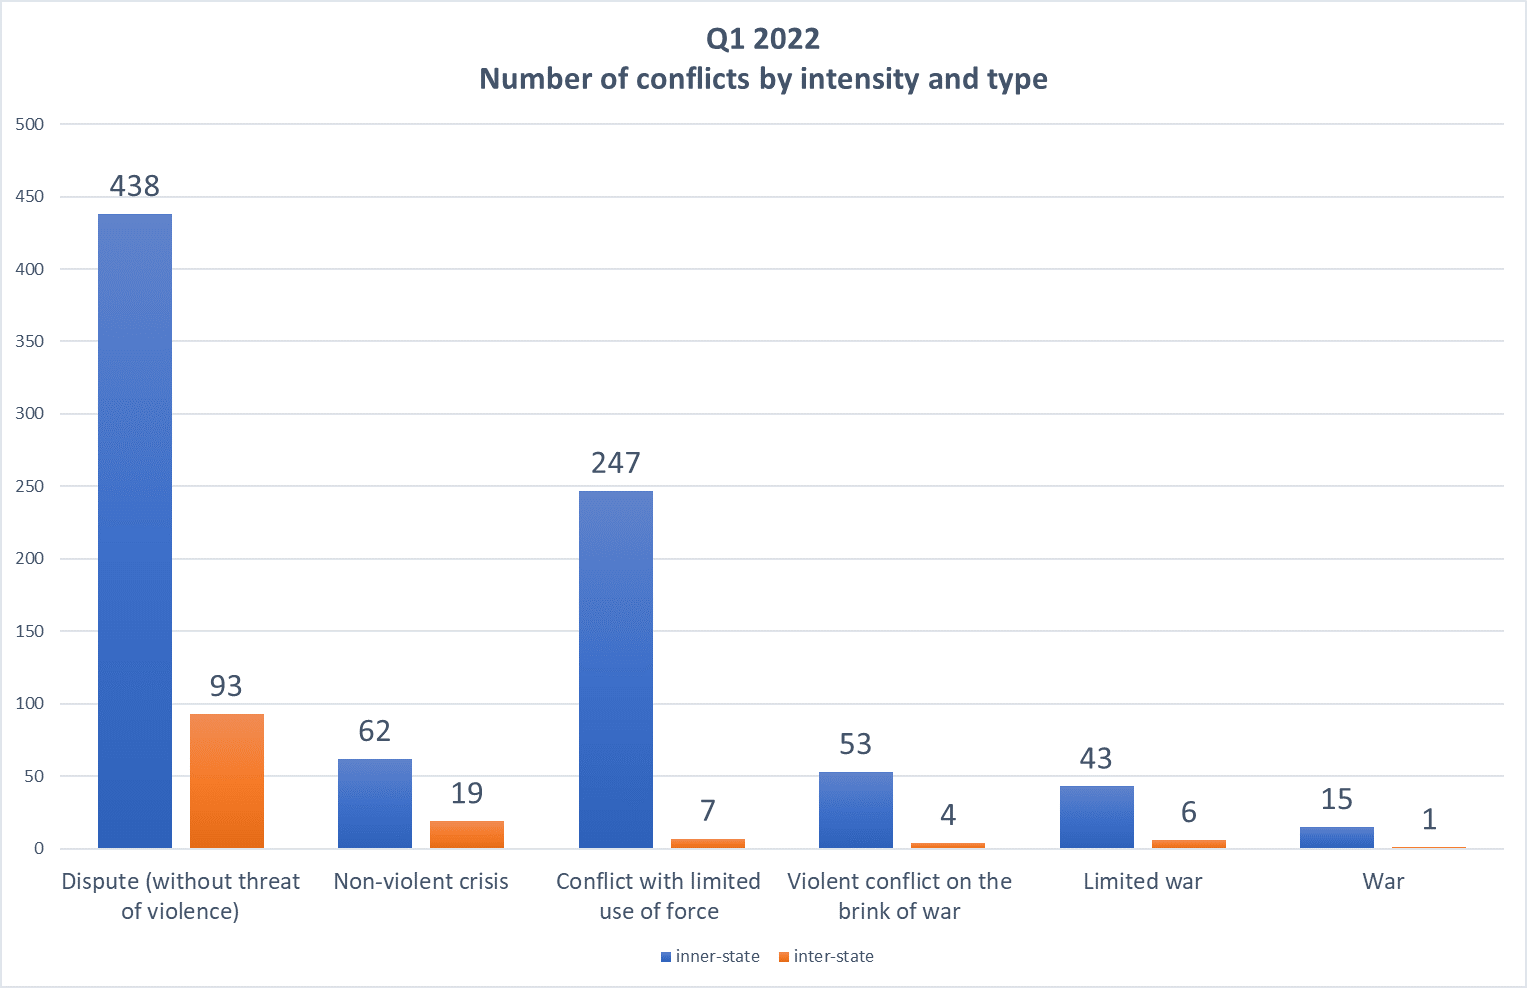 Number of conflicts by intensity and type Q1 2022